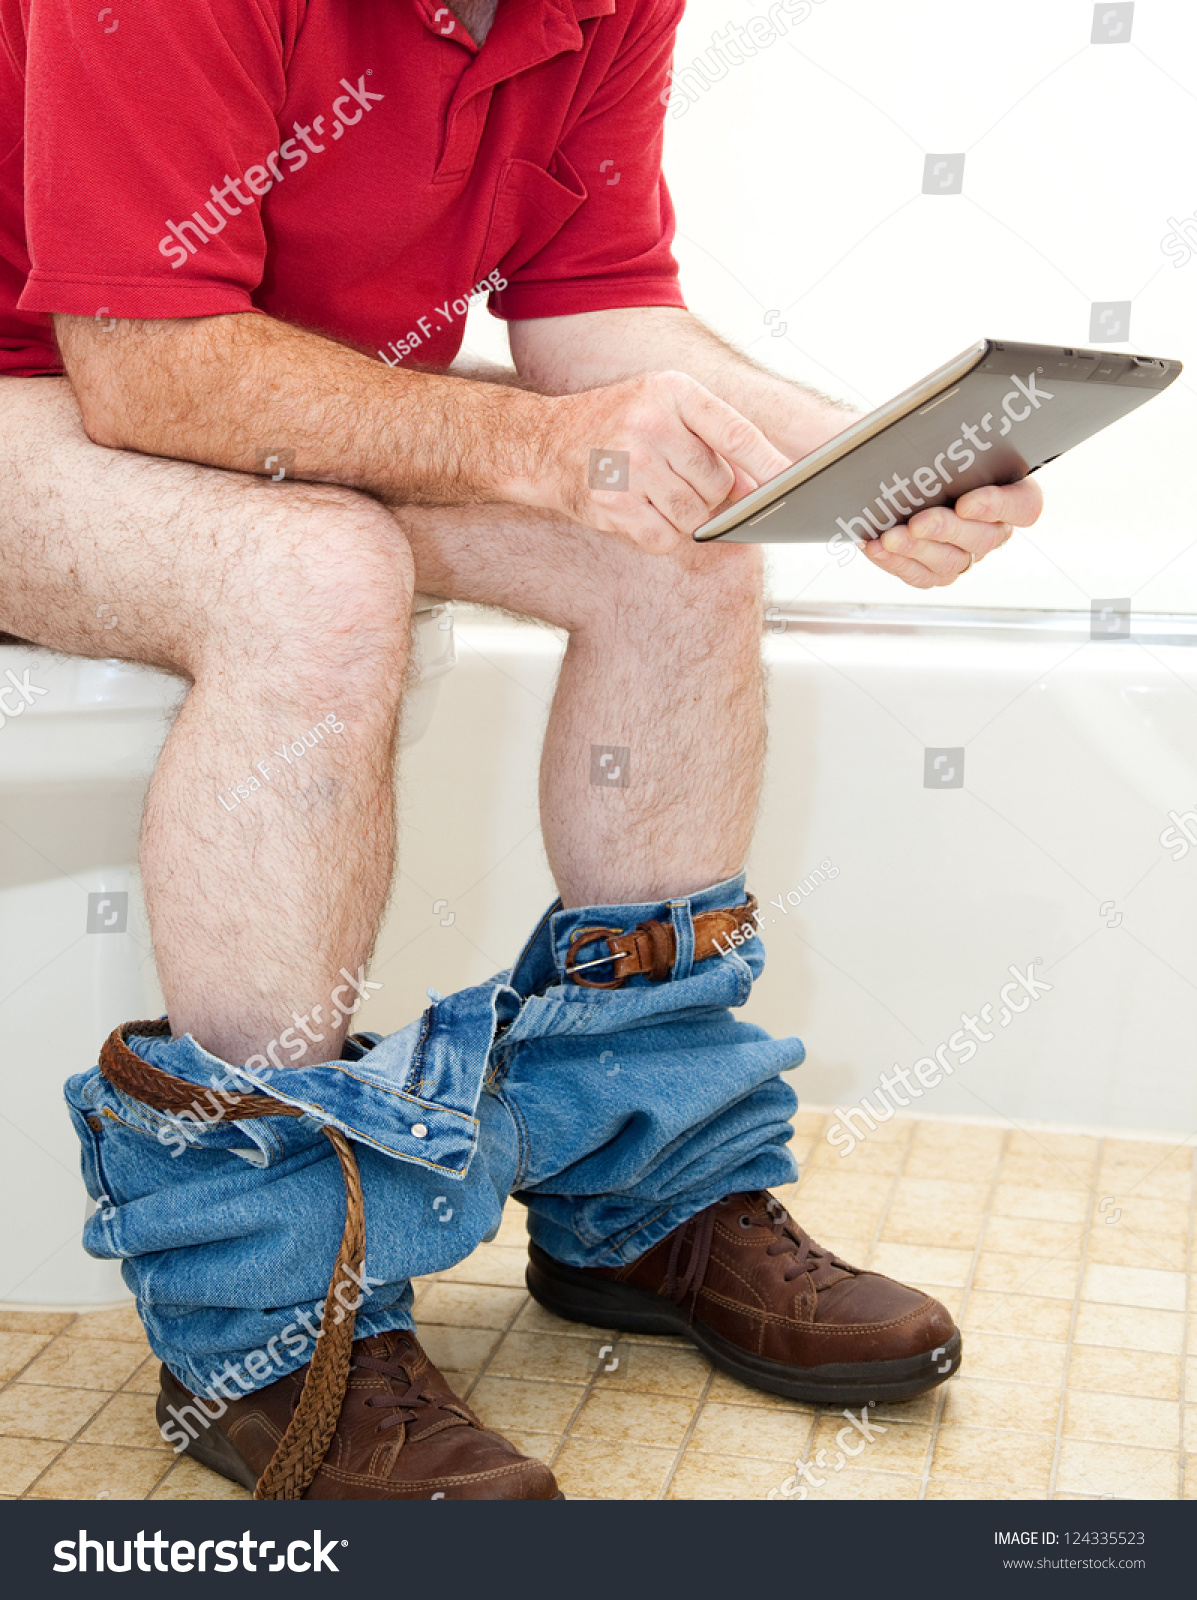 Young Man Sitting On Toilet Bowl Stock Photo - Image of 